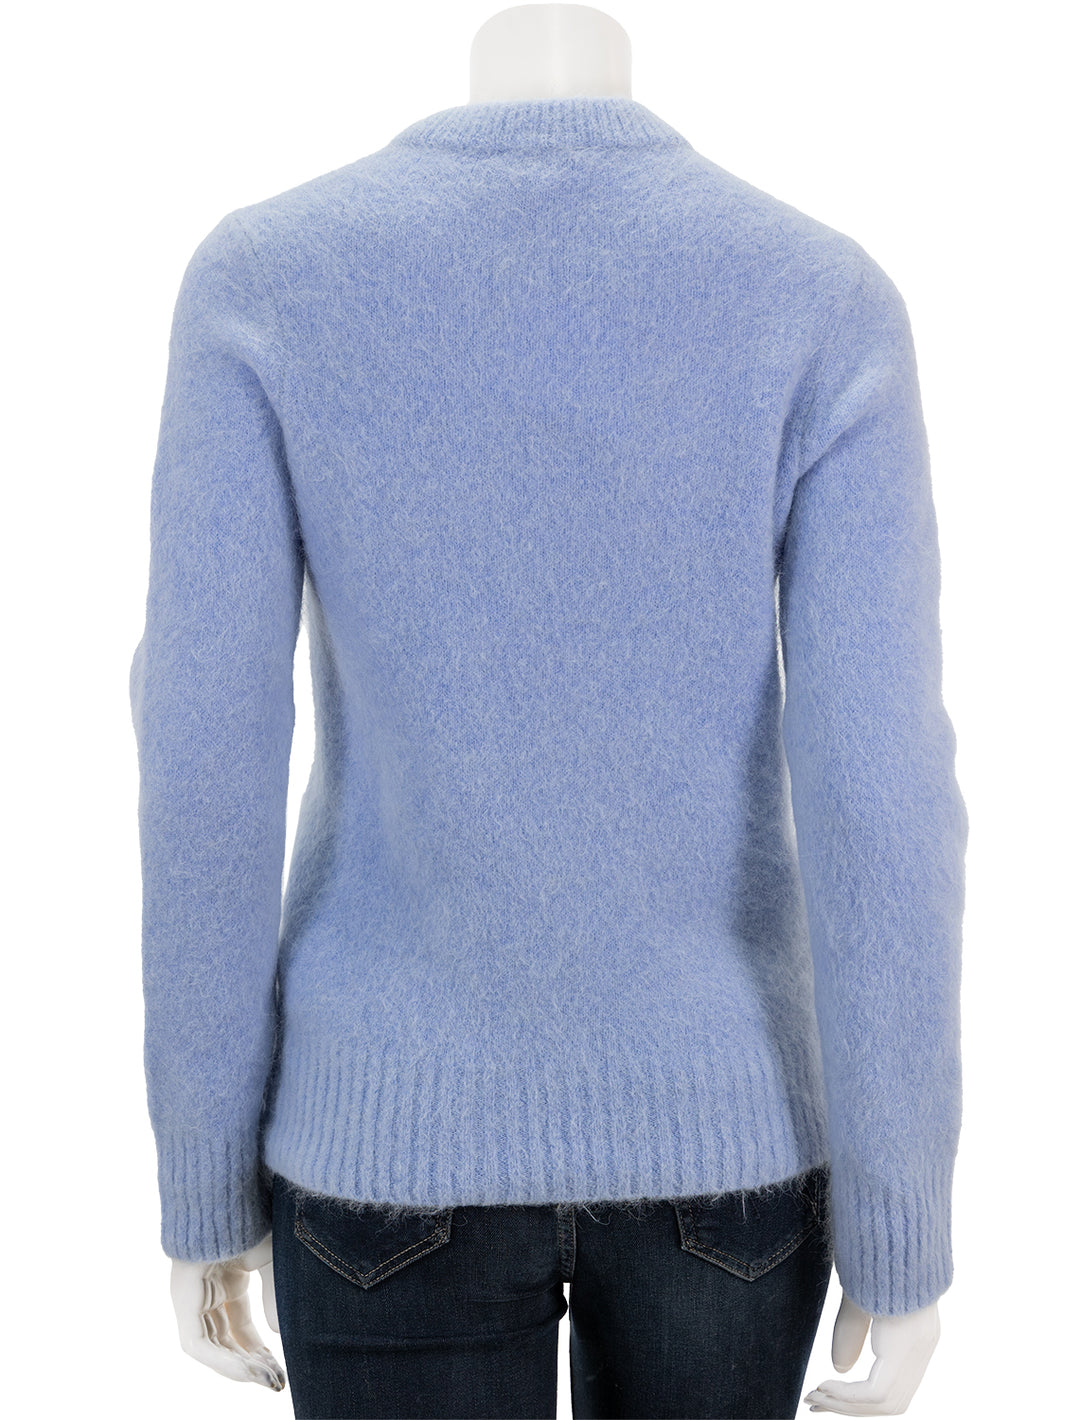 Back view of GANNI's brushed alpaca o-neck pullover in powder blue.